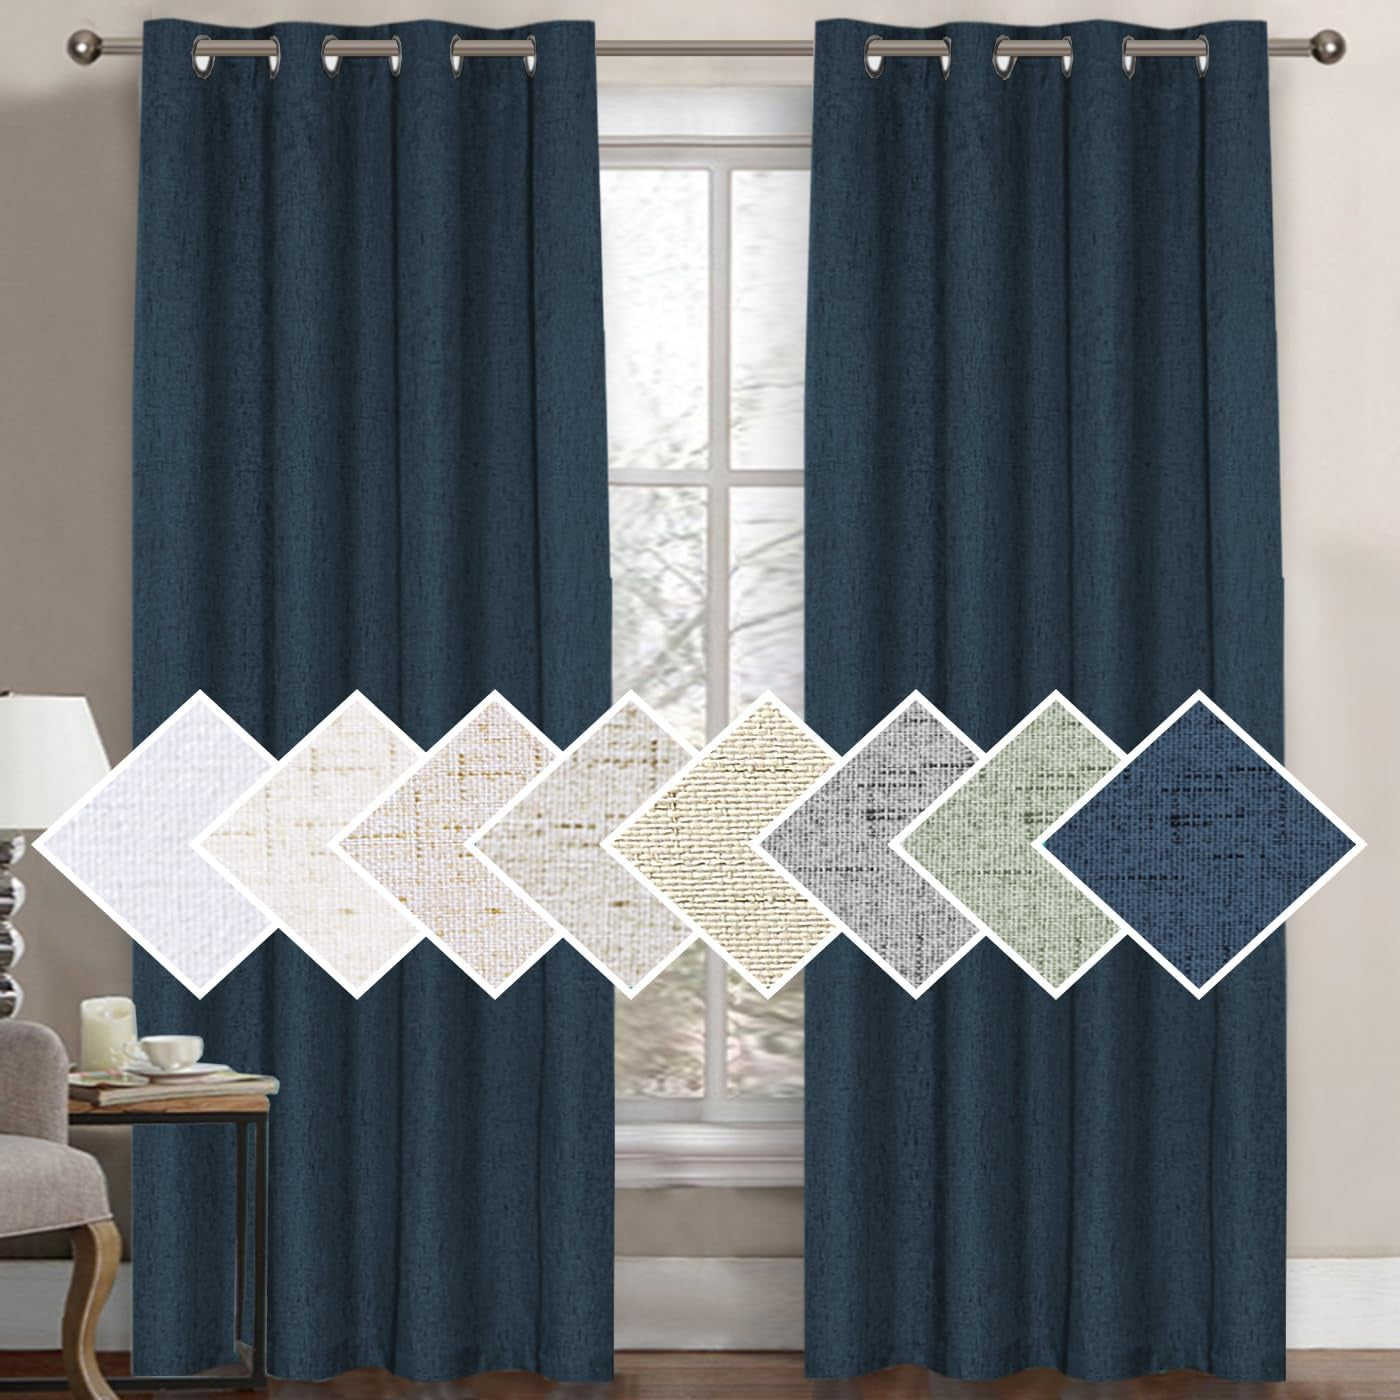 H.VERSAILTEX 100% Blackout Curtains for Bedroom Thermal Insulated Linen Textured Curtains Heat and Full Light Blocking Drapes Living Room Curtains 2 Panel Sets, 52X84 - Inch, Natural  H.VERSAILTEX Navy 1 Panel - 52"W X 96"L 